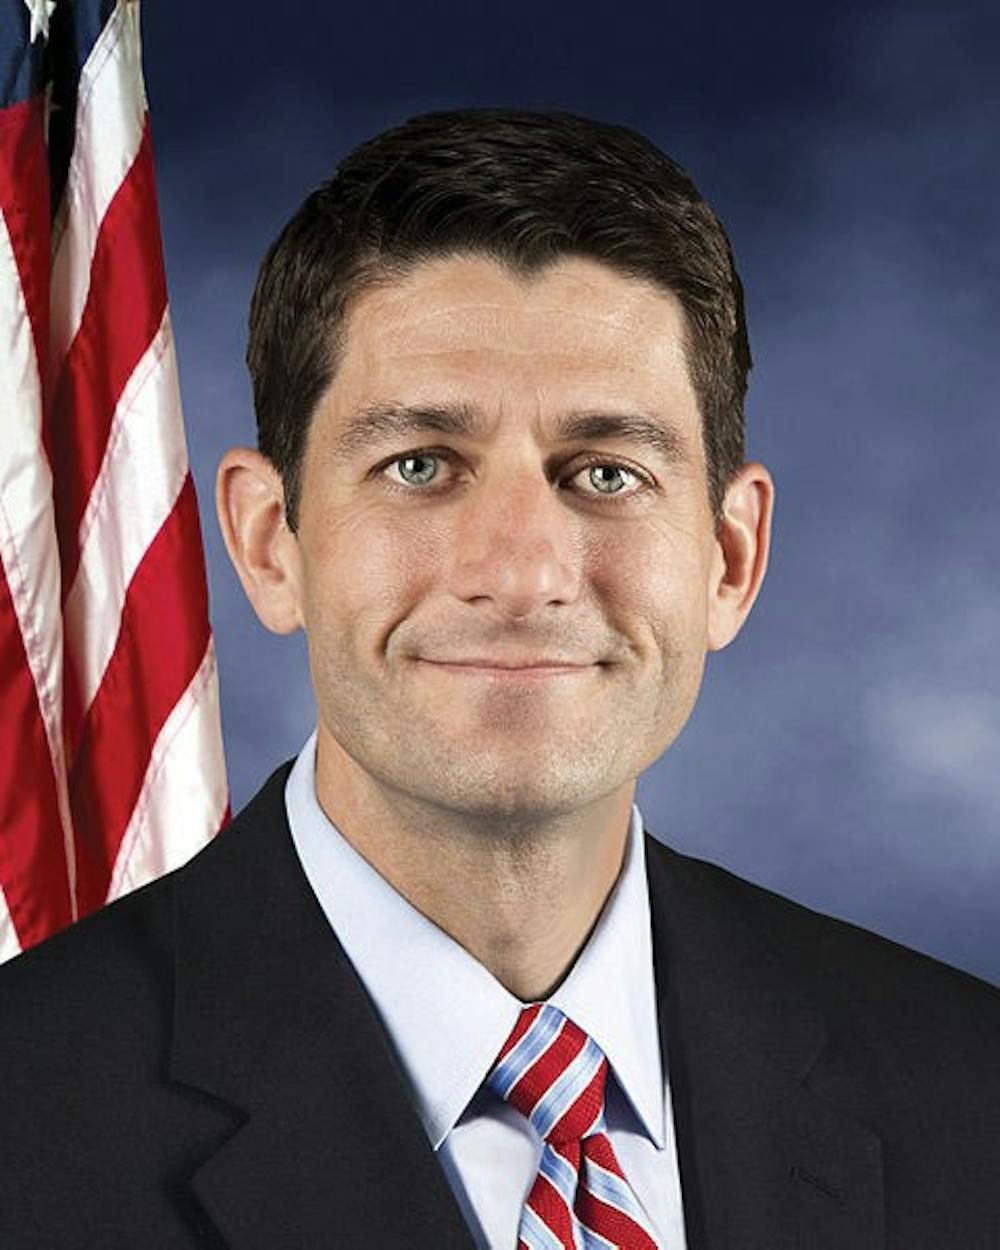 Paul Ryan says no to paid maternity leave